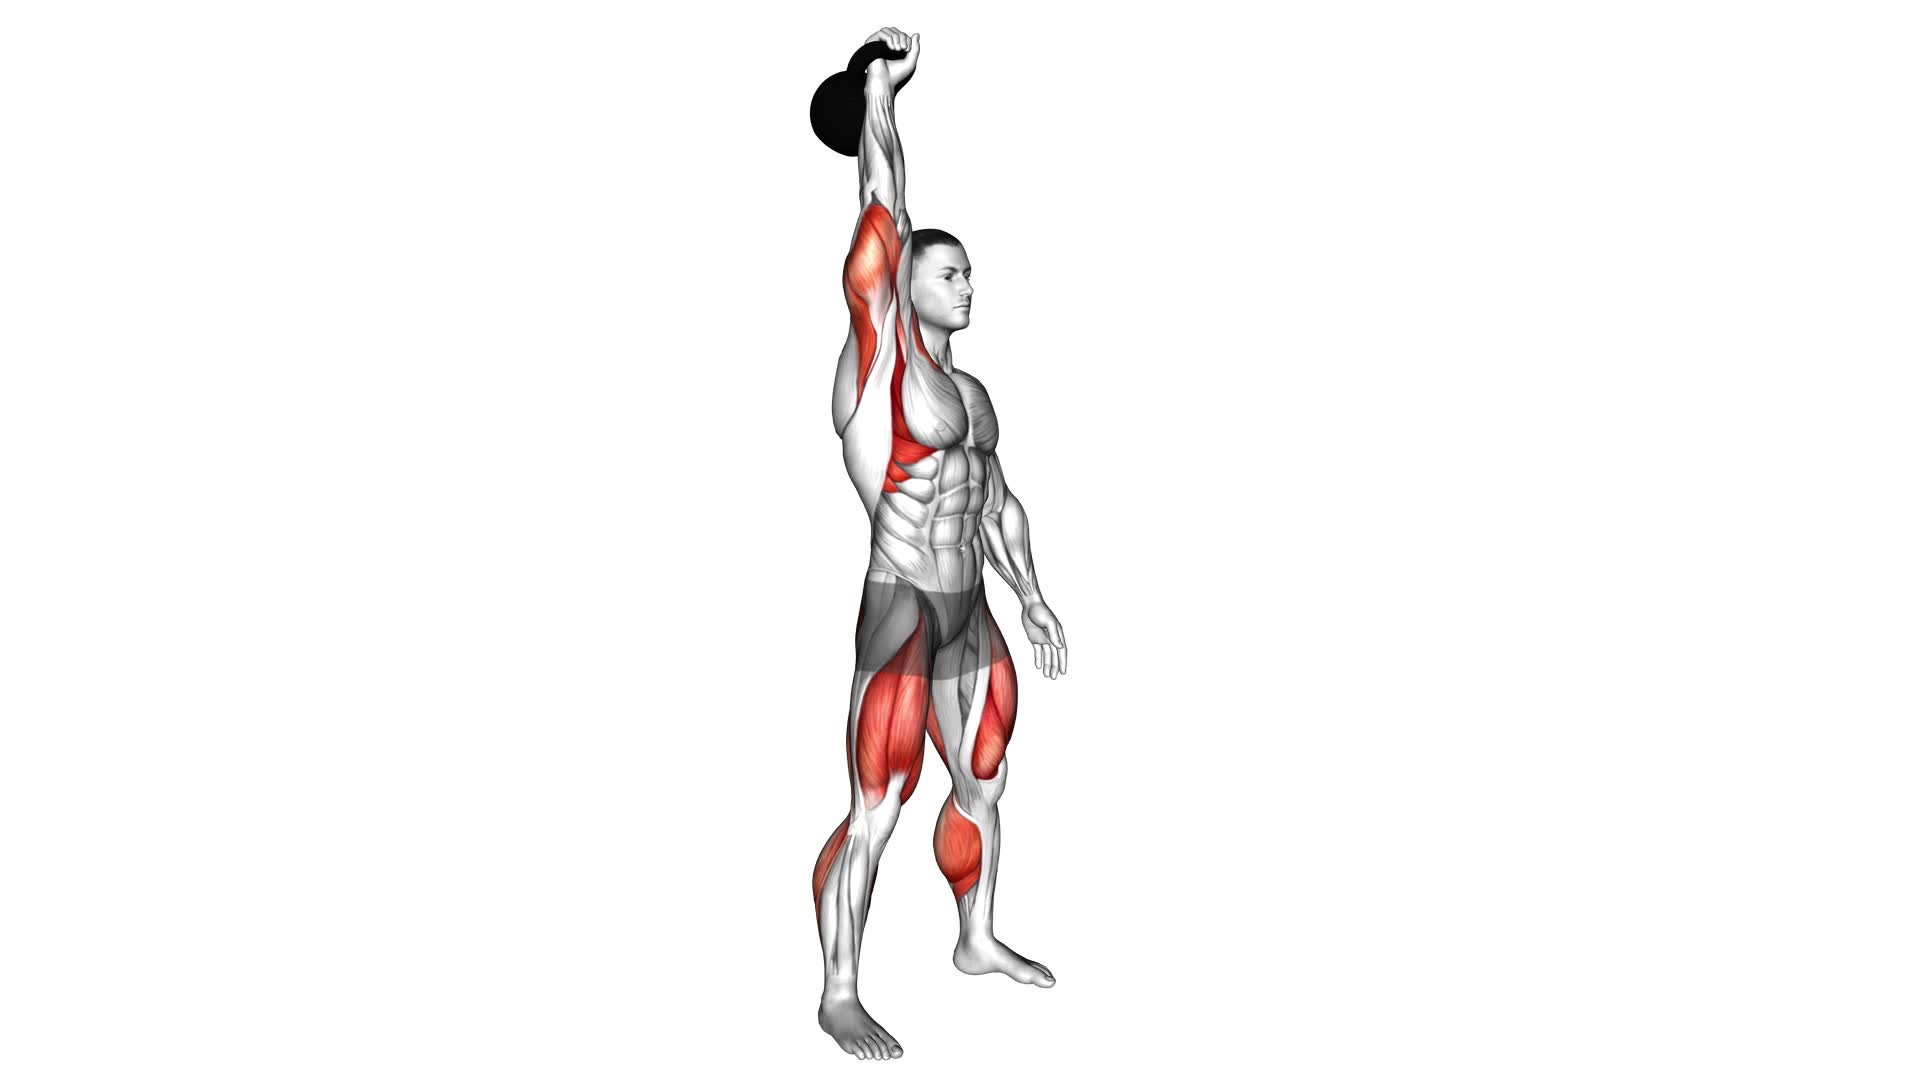 Kettlebell One Arm Snatch - Video Exercise Guide & Tips